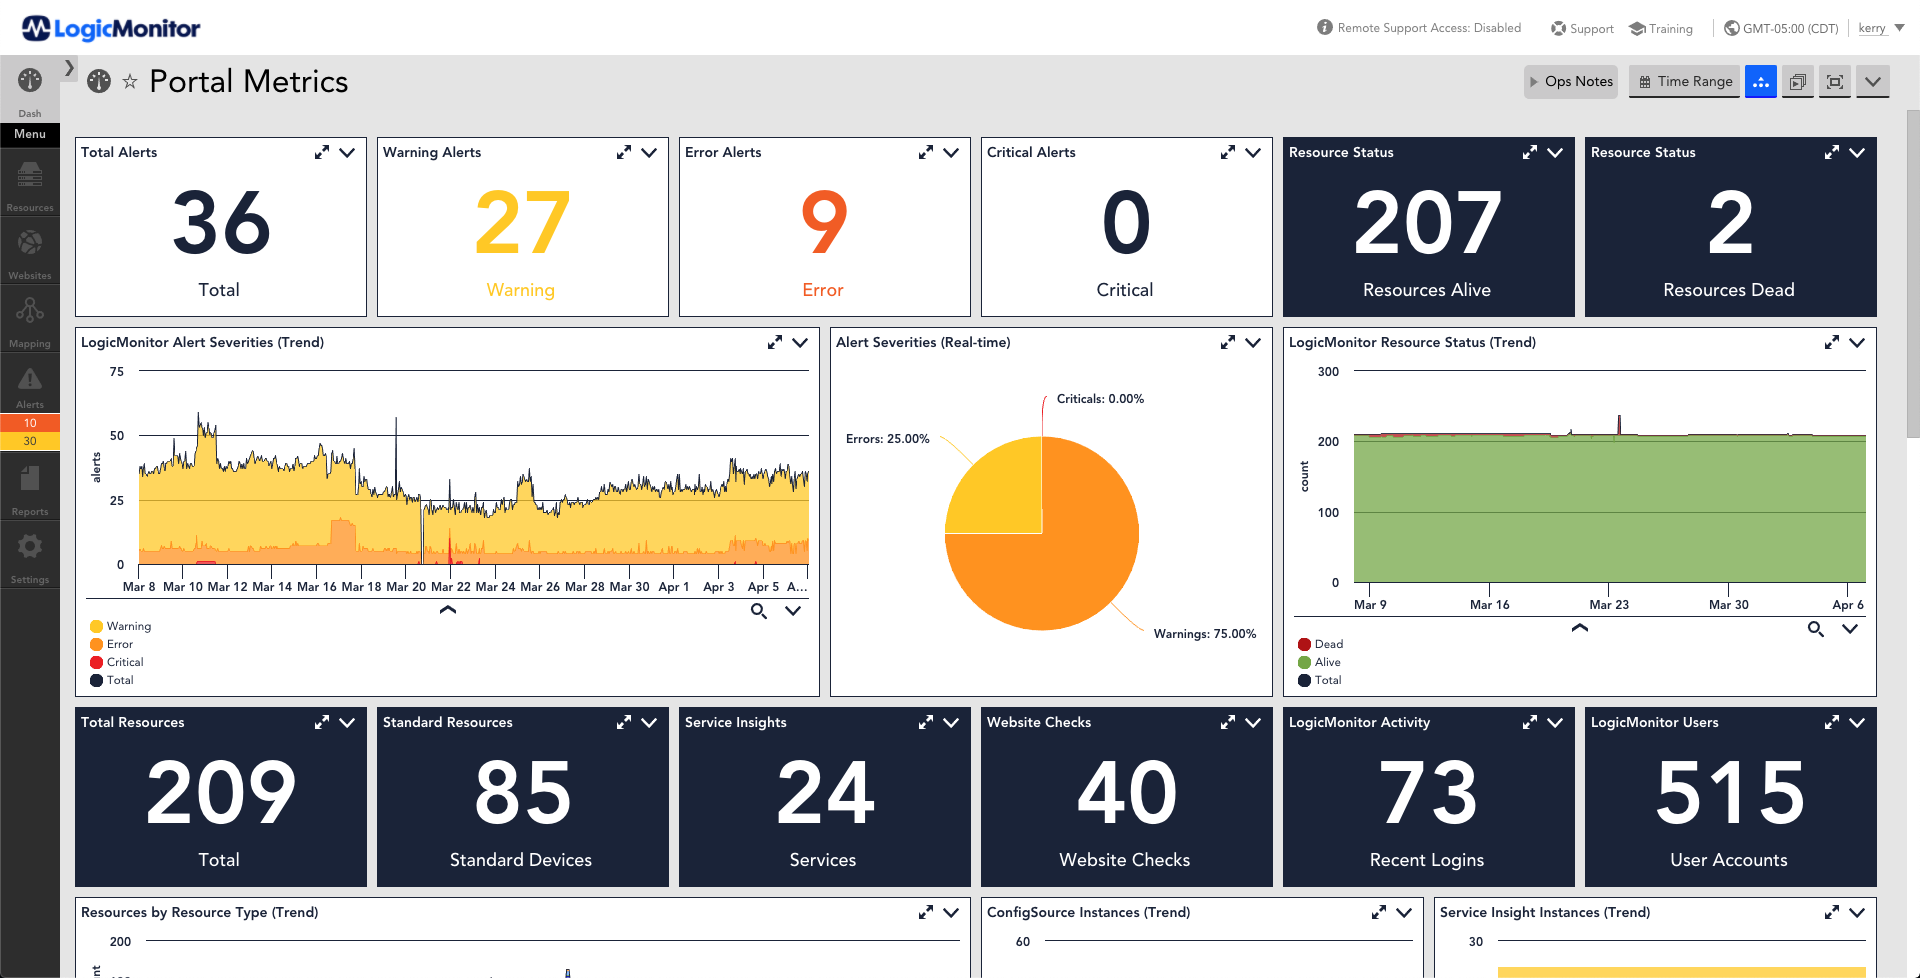 This dashboard provides an a listing of various metrics that are monitored for Logic Monitor Portal. The metrics displayed are alert counts for: total, warning, error, critical, resource counts for alive and dead, Alert severity over time, severity distribution, resource status over time, resource counts for: total, standard devices, services, website checks, recent logins, users, resource usage over time, configsource instances over time.